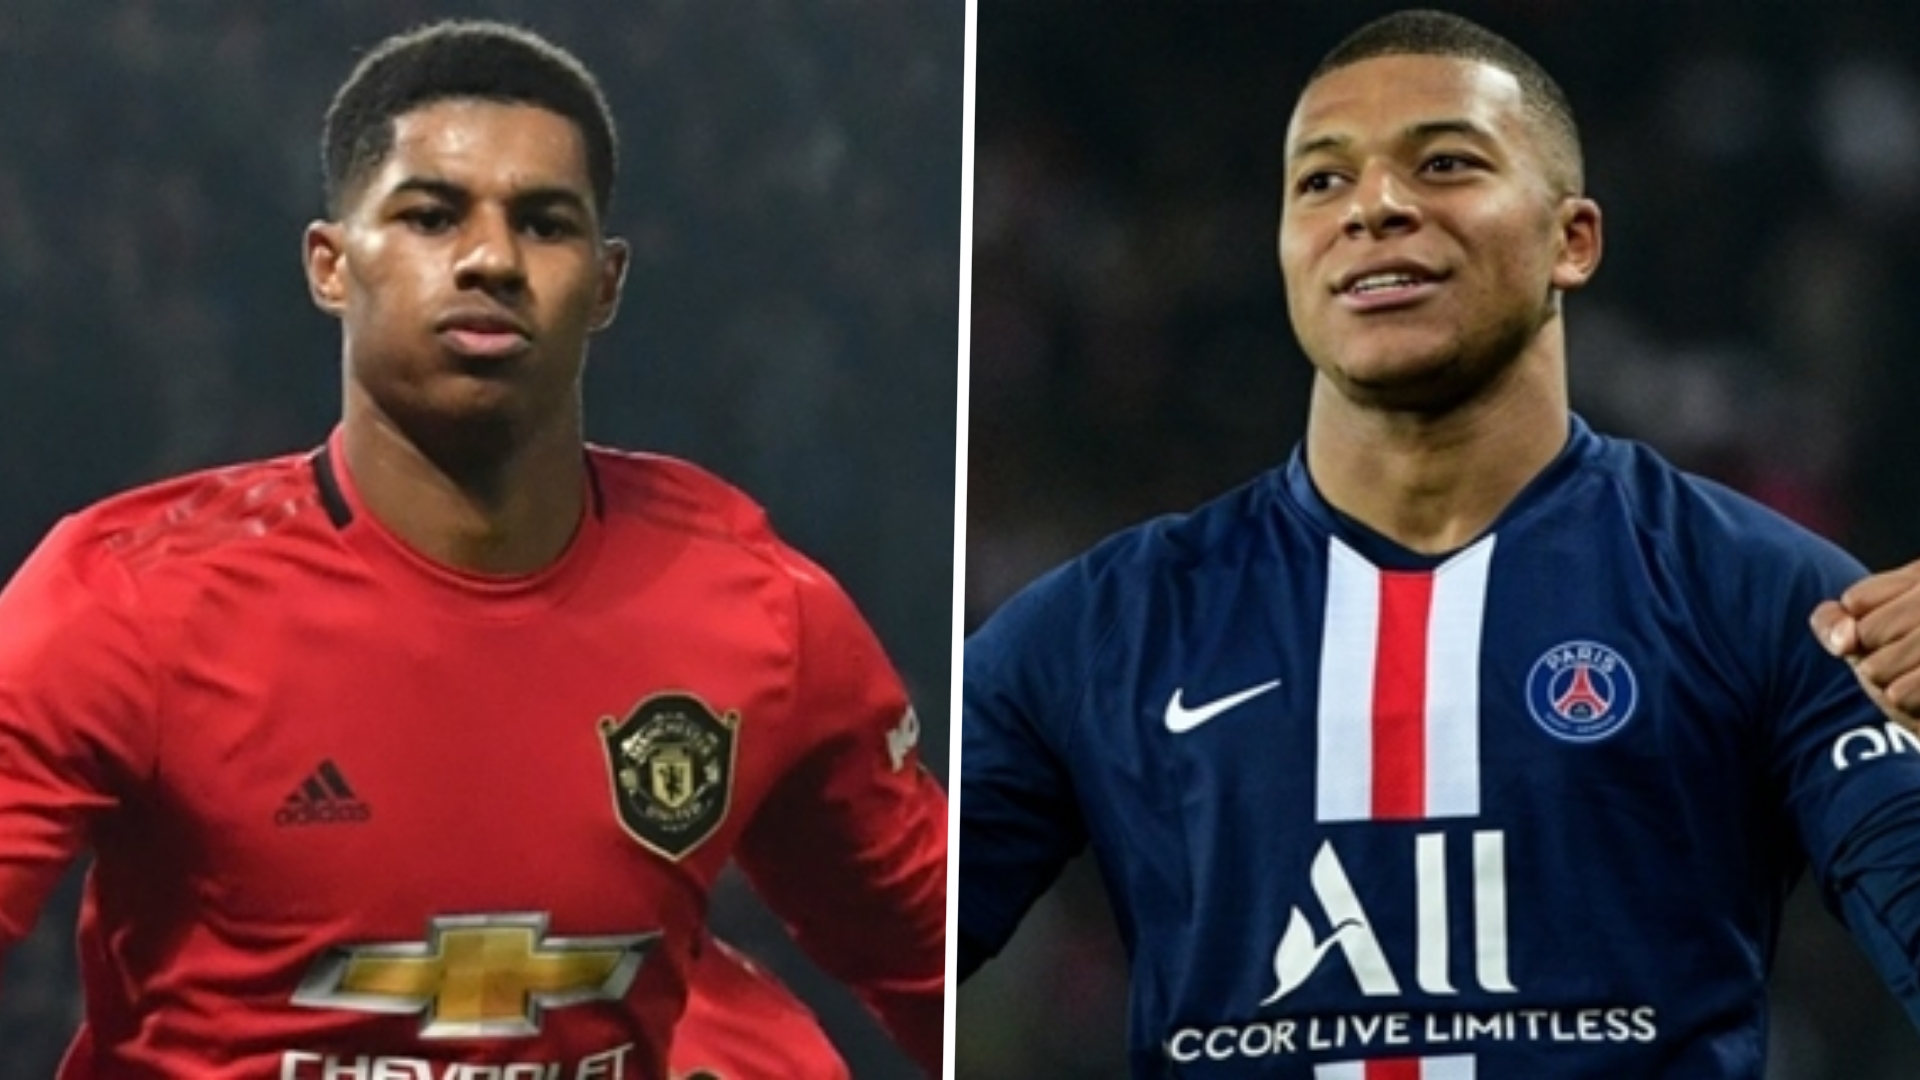 'Rashford is at the same level as Mbappe' - Man Utd star equal to PSG counterpart 'in terms of quality', says Saha